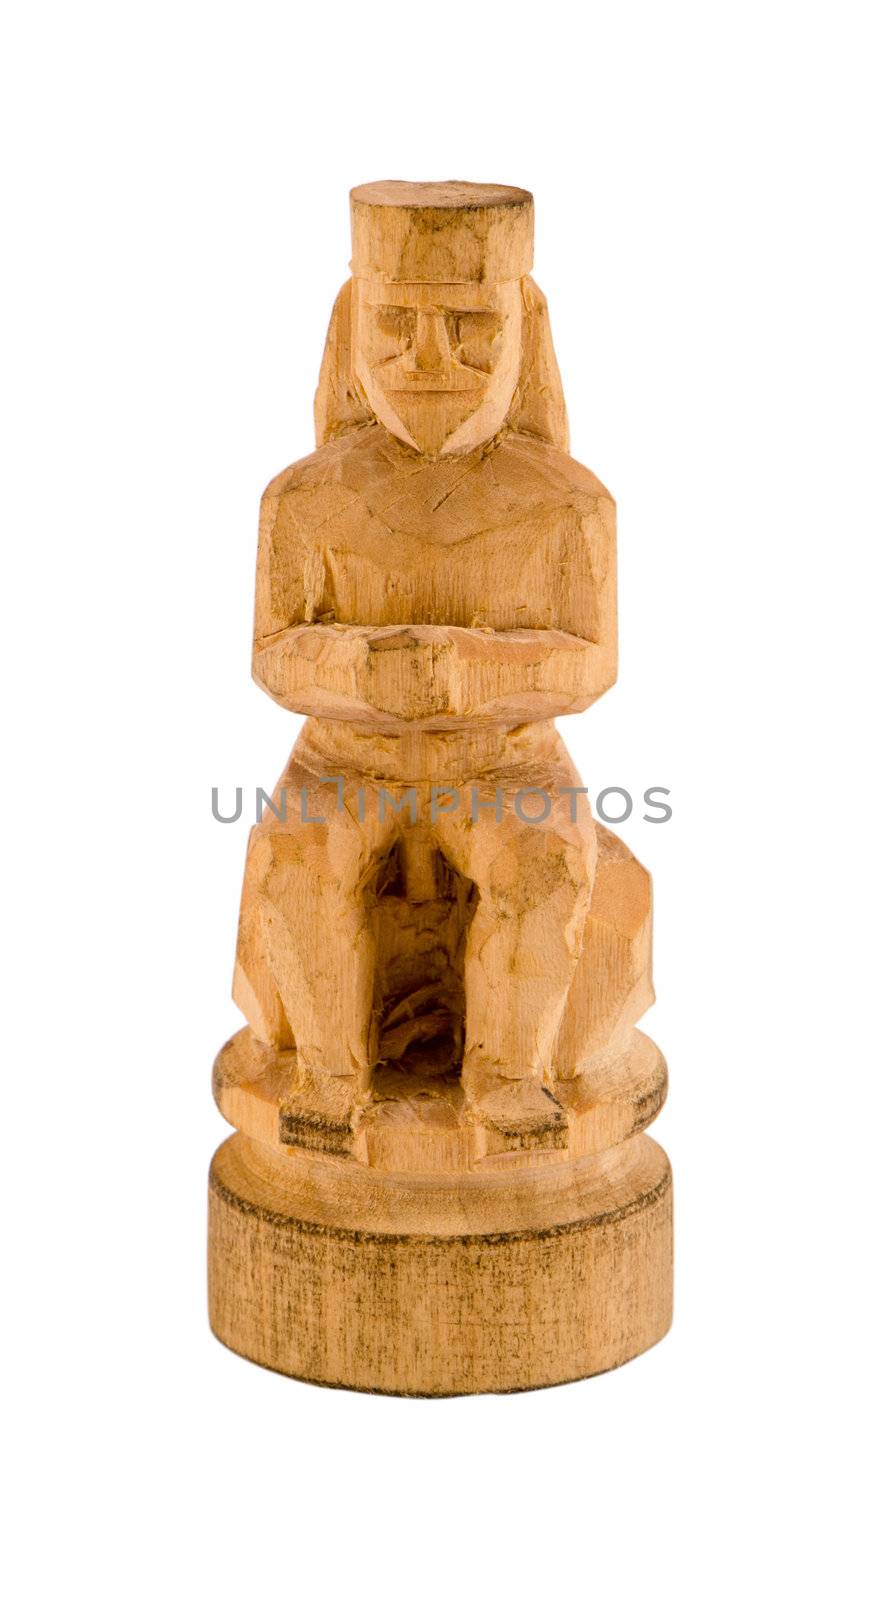 priest statue simply carved handmade craft from wood piece isolated on white background.